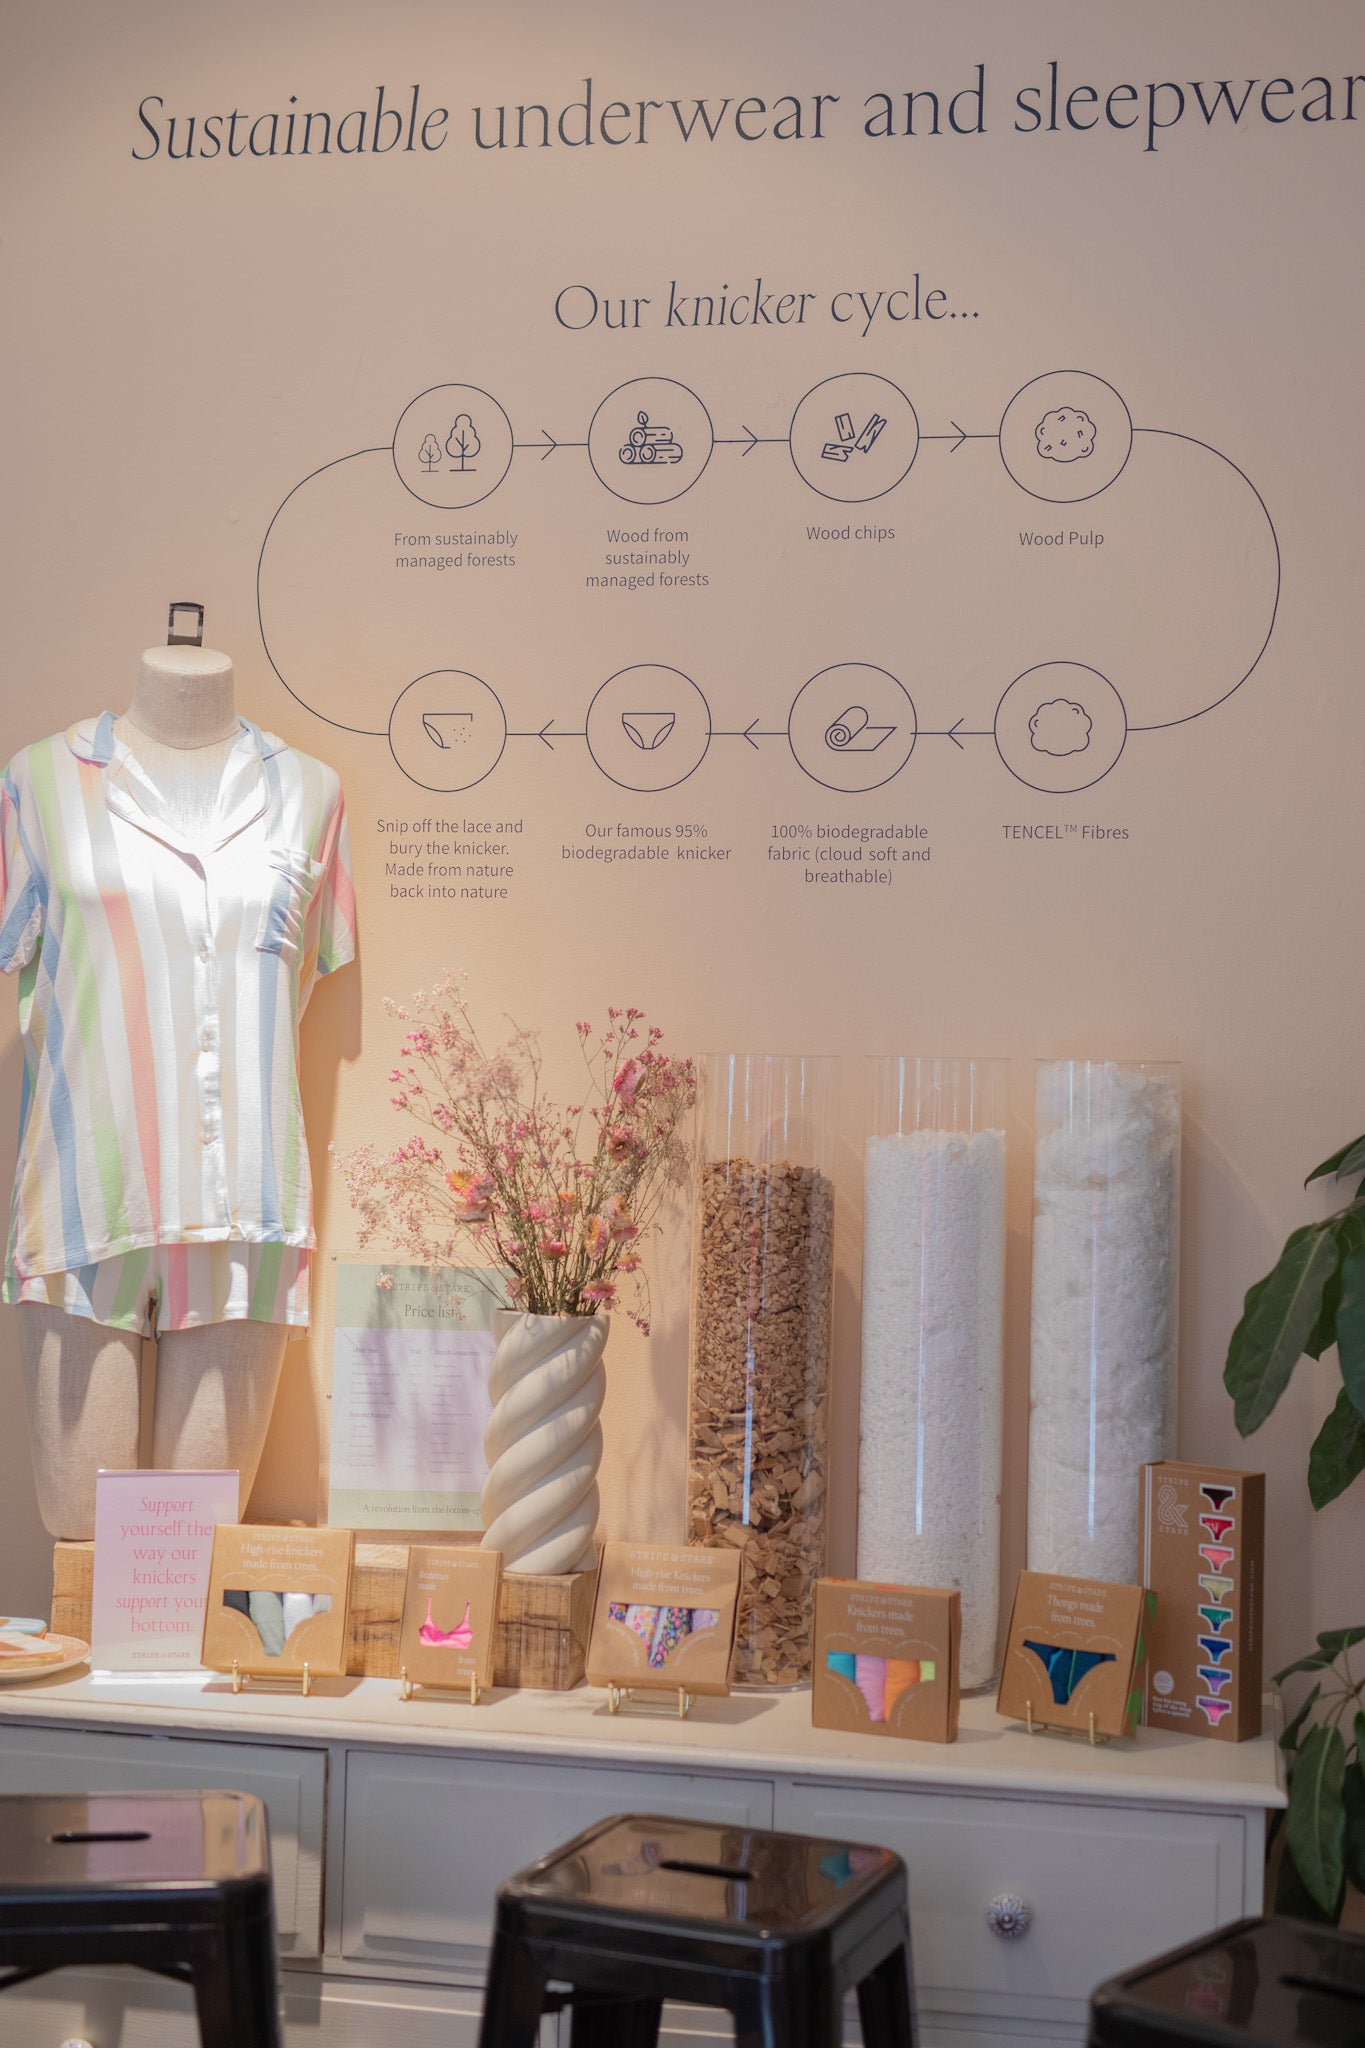 Stripe and Stare's cycle of sustainability and biodegradability